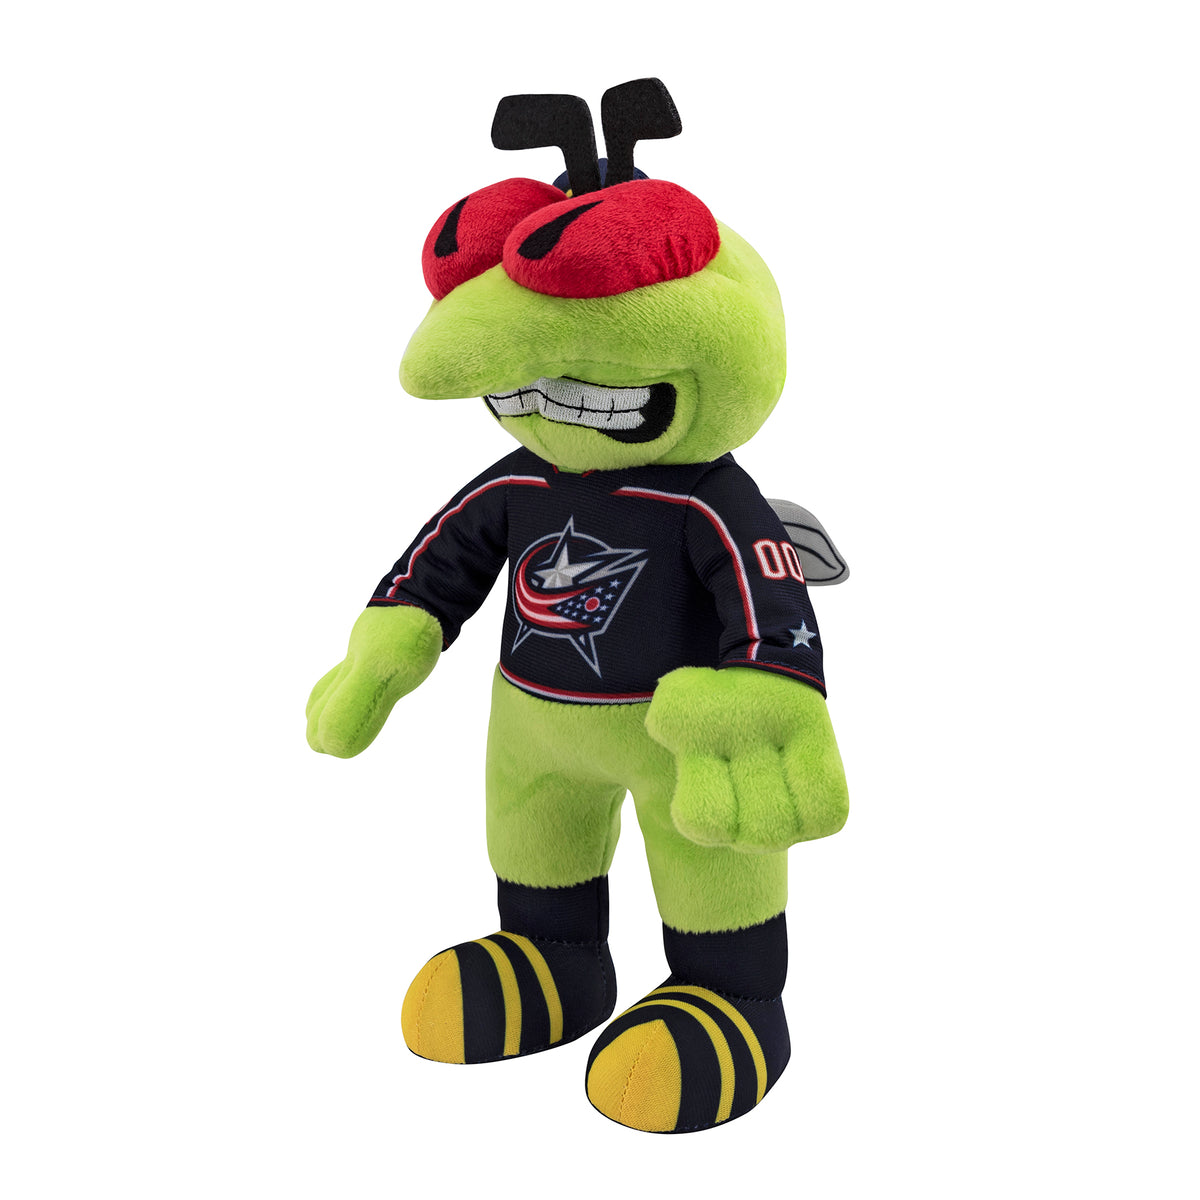 Blue Jackets mascot Stinger nominated for Mascot Hall of Fame